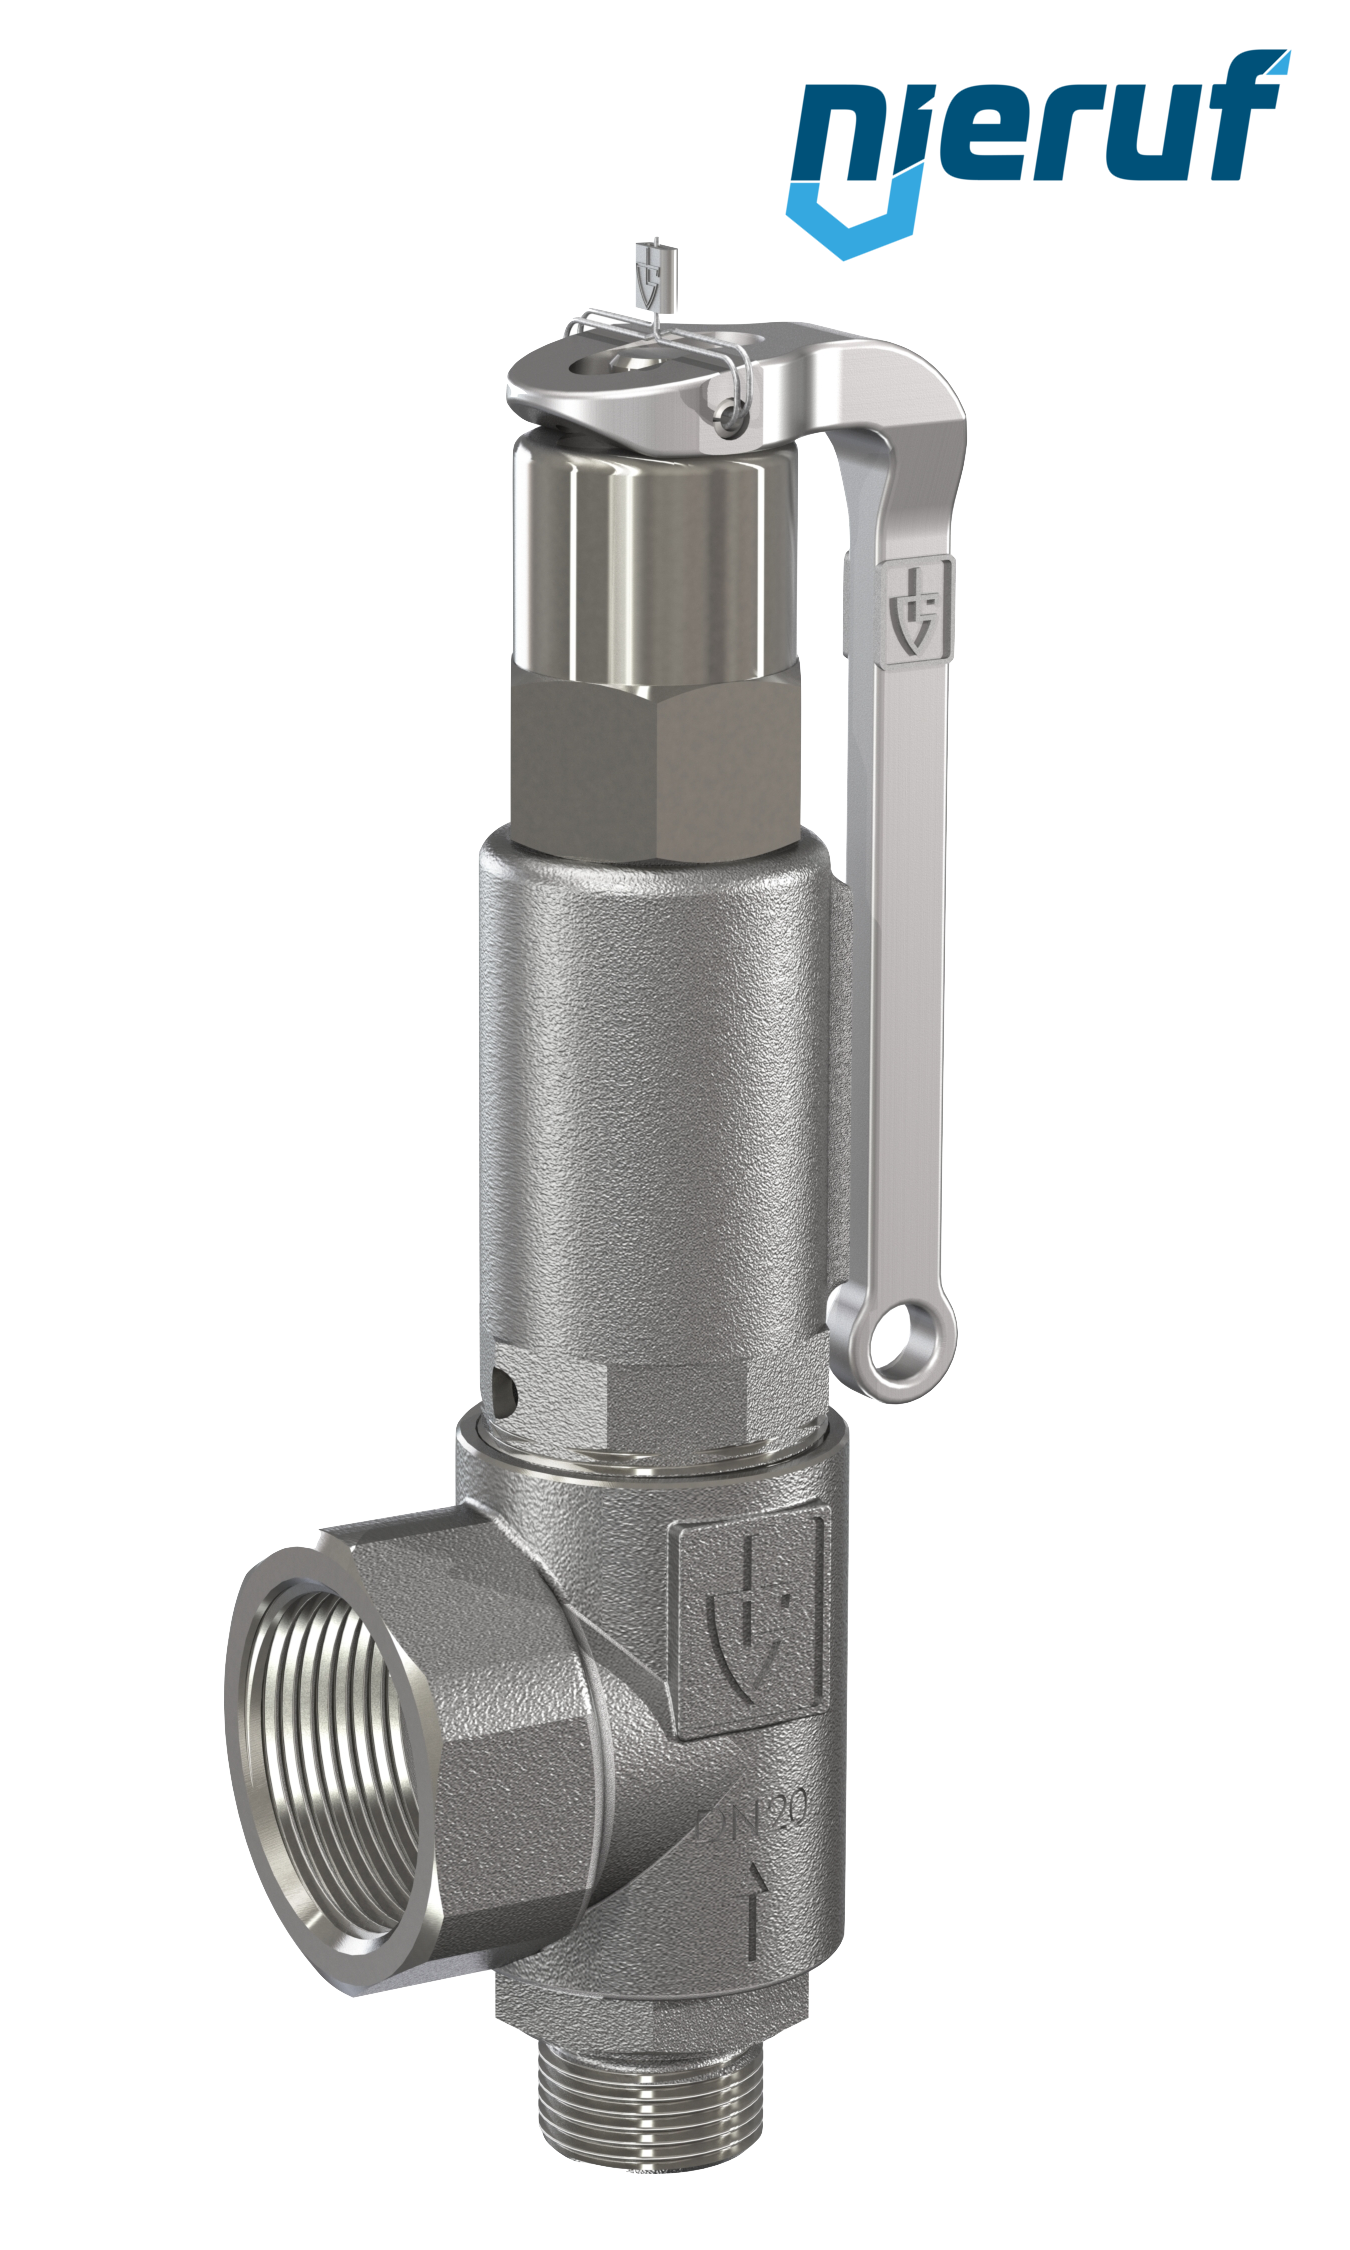 safety valve 1 1/2" m  x 2" fm SV05 neutral liquid media, stainless steel PTFE, with lever